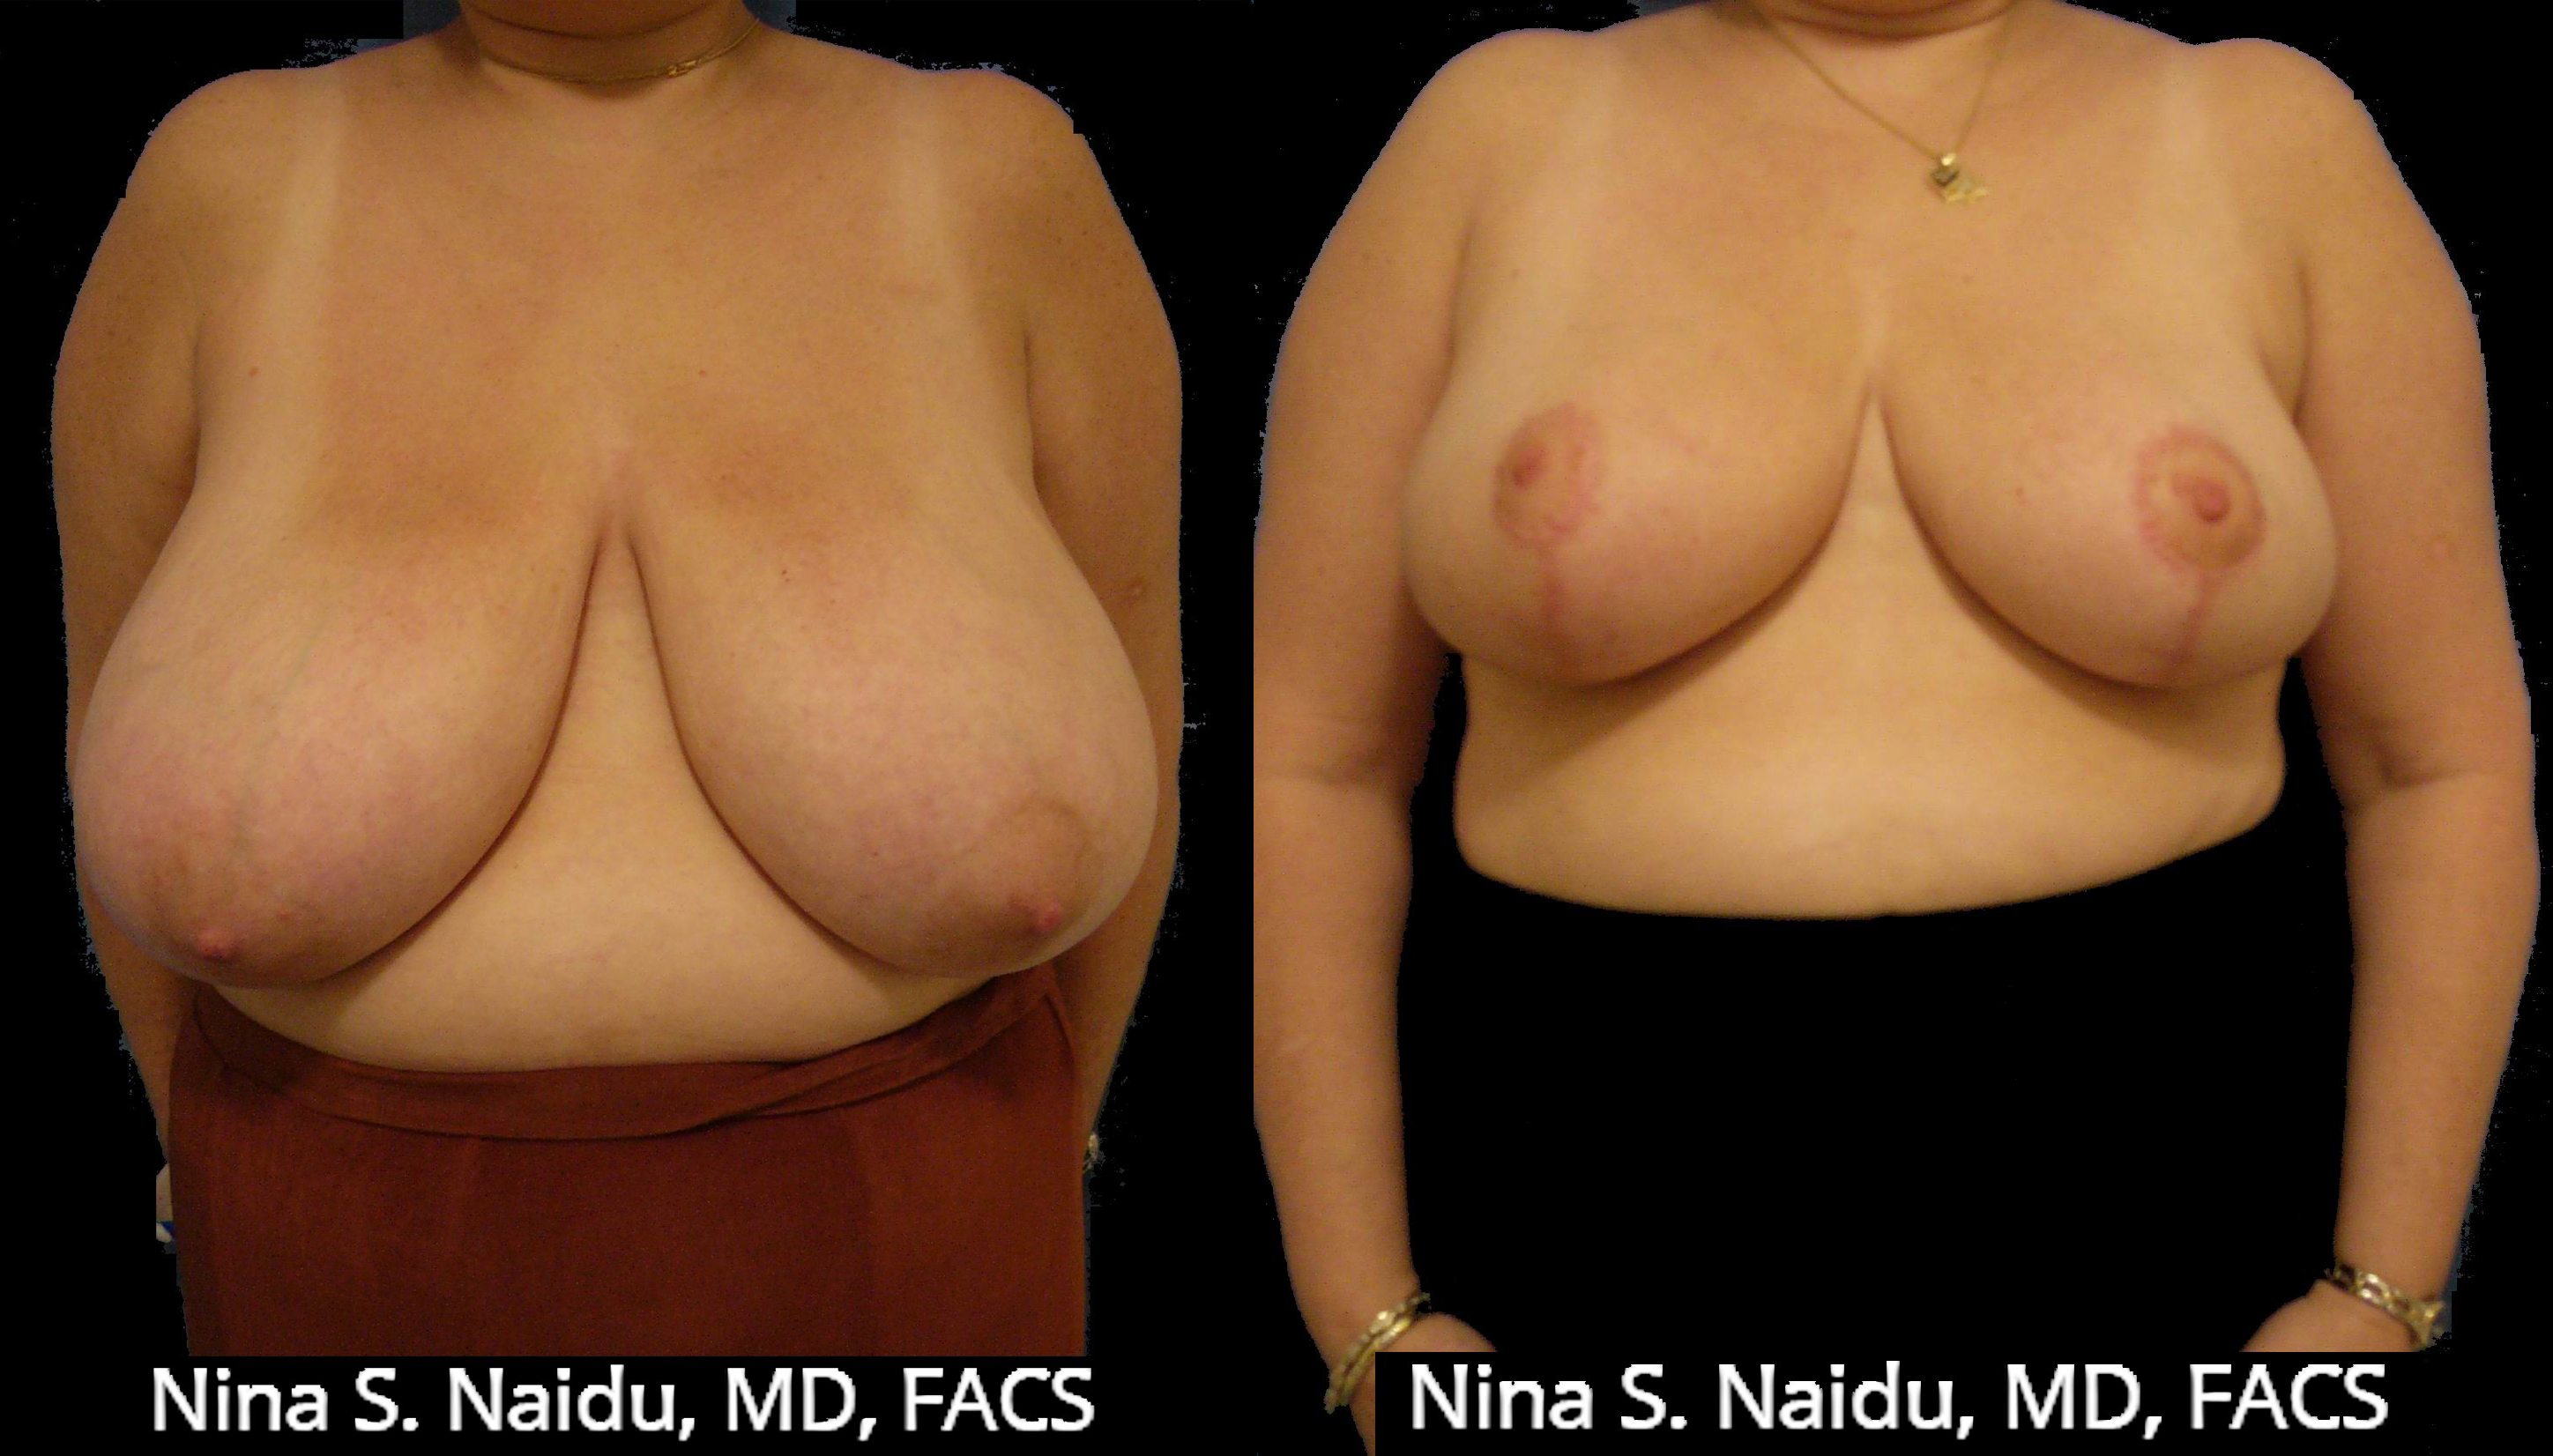 nude-breast-reduction-before-and-after-pics